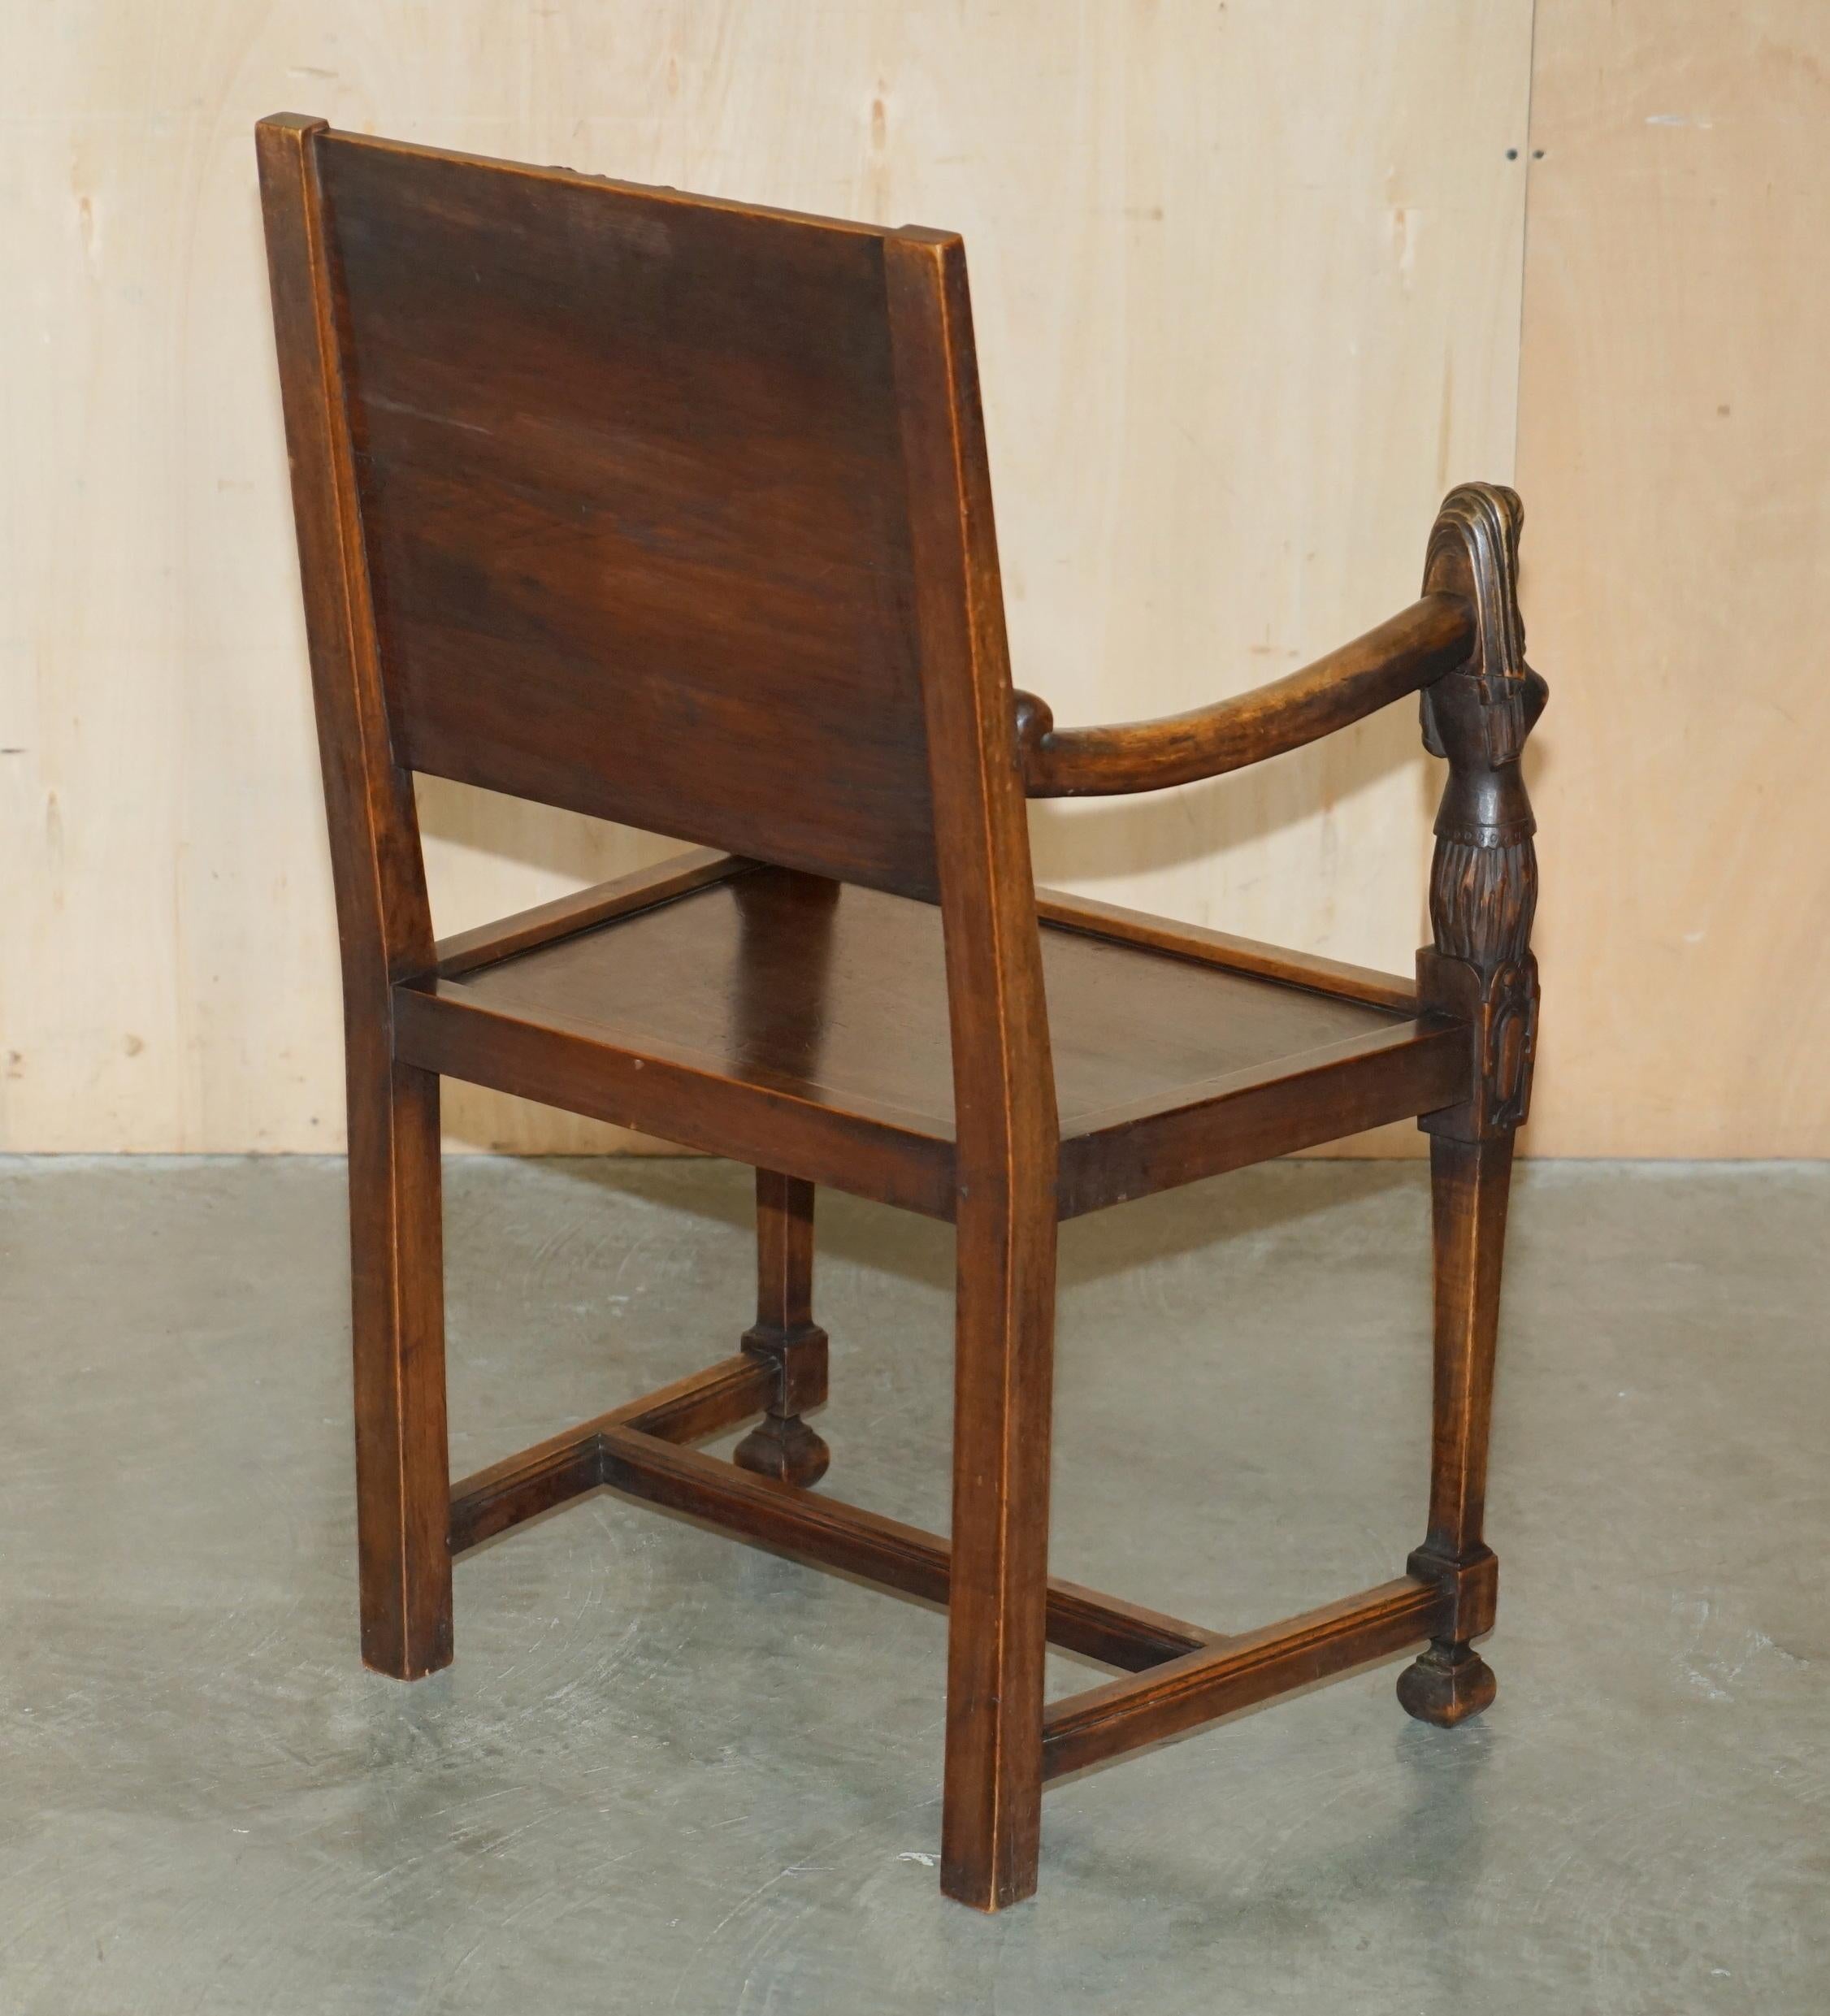 PAIR OF ORNATELY CARVED NEO-GOTHIC SOLiD WALNUT 19TH CENTURY CEREMONY ARMCHAIRS For Sale 10